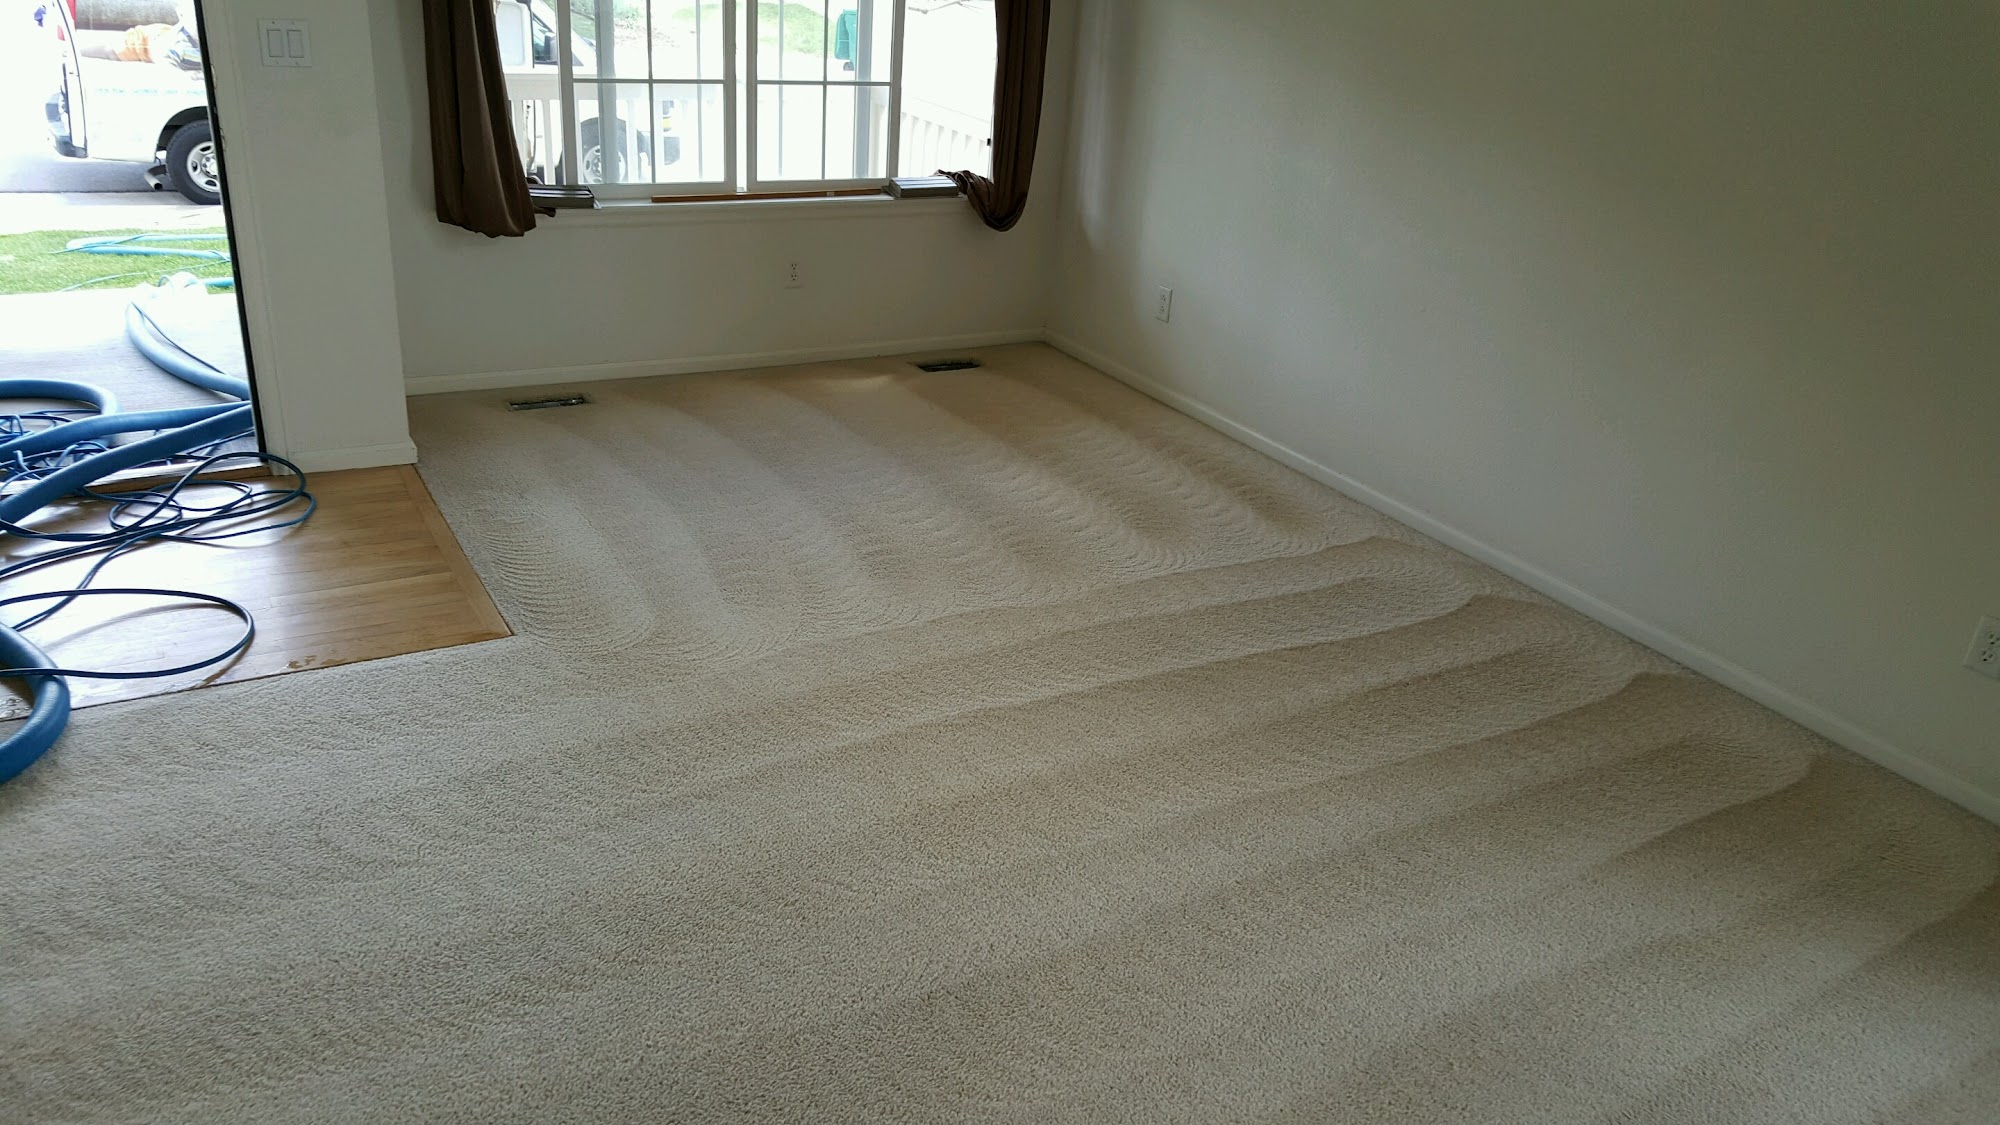 Leaf Carpet Cleaning Services